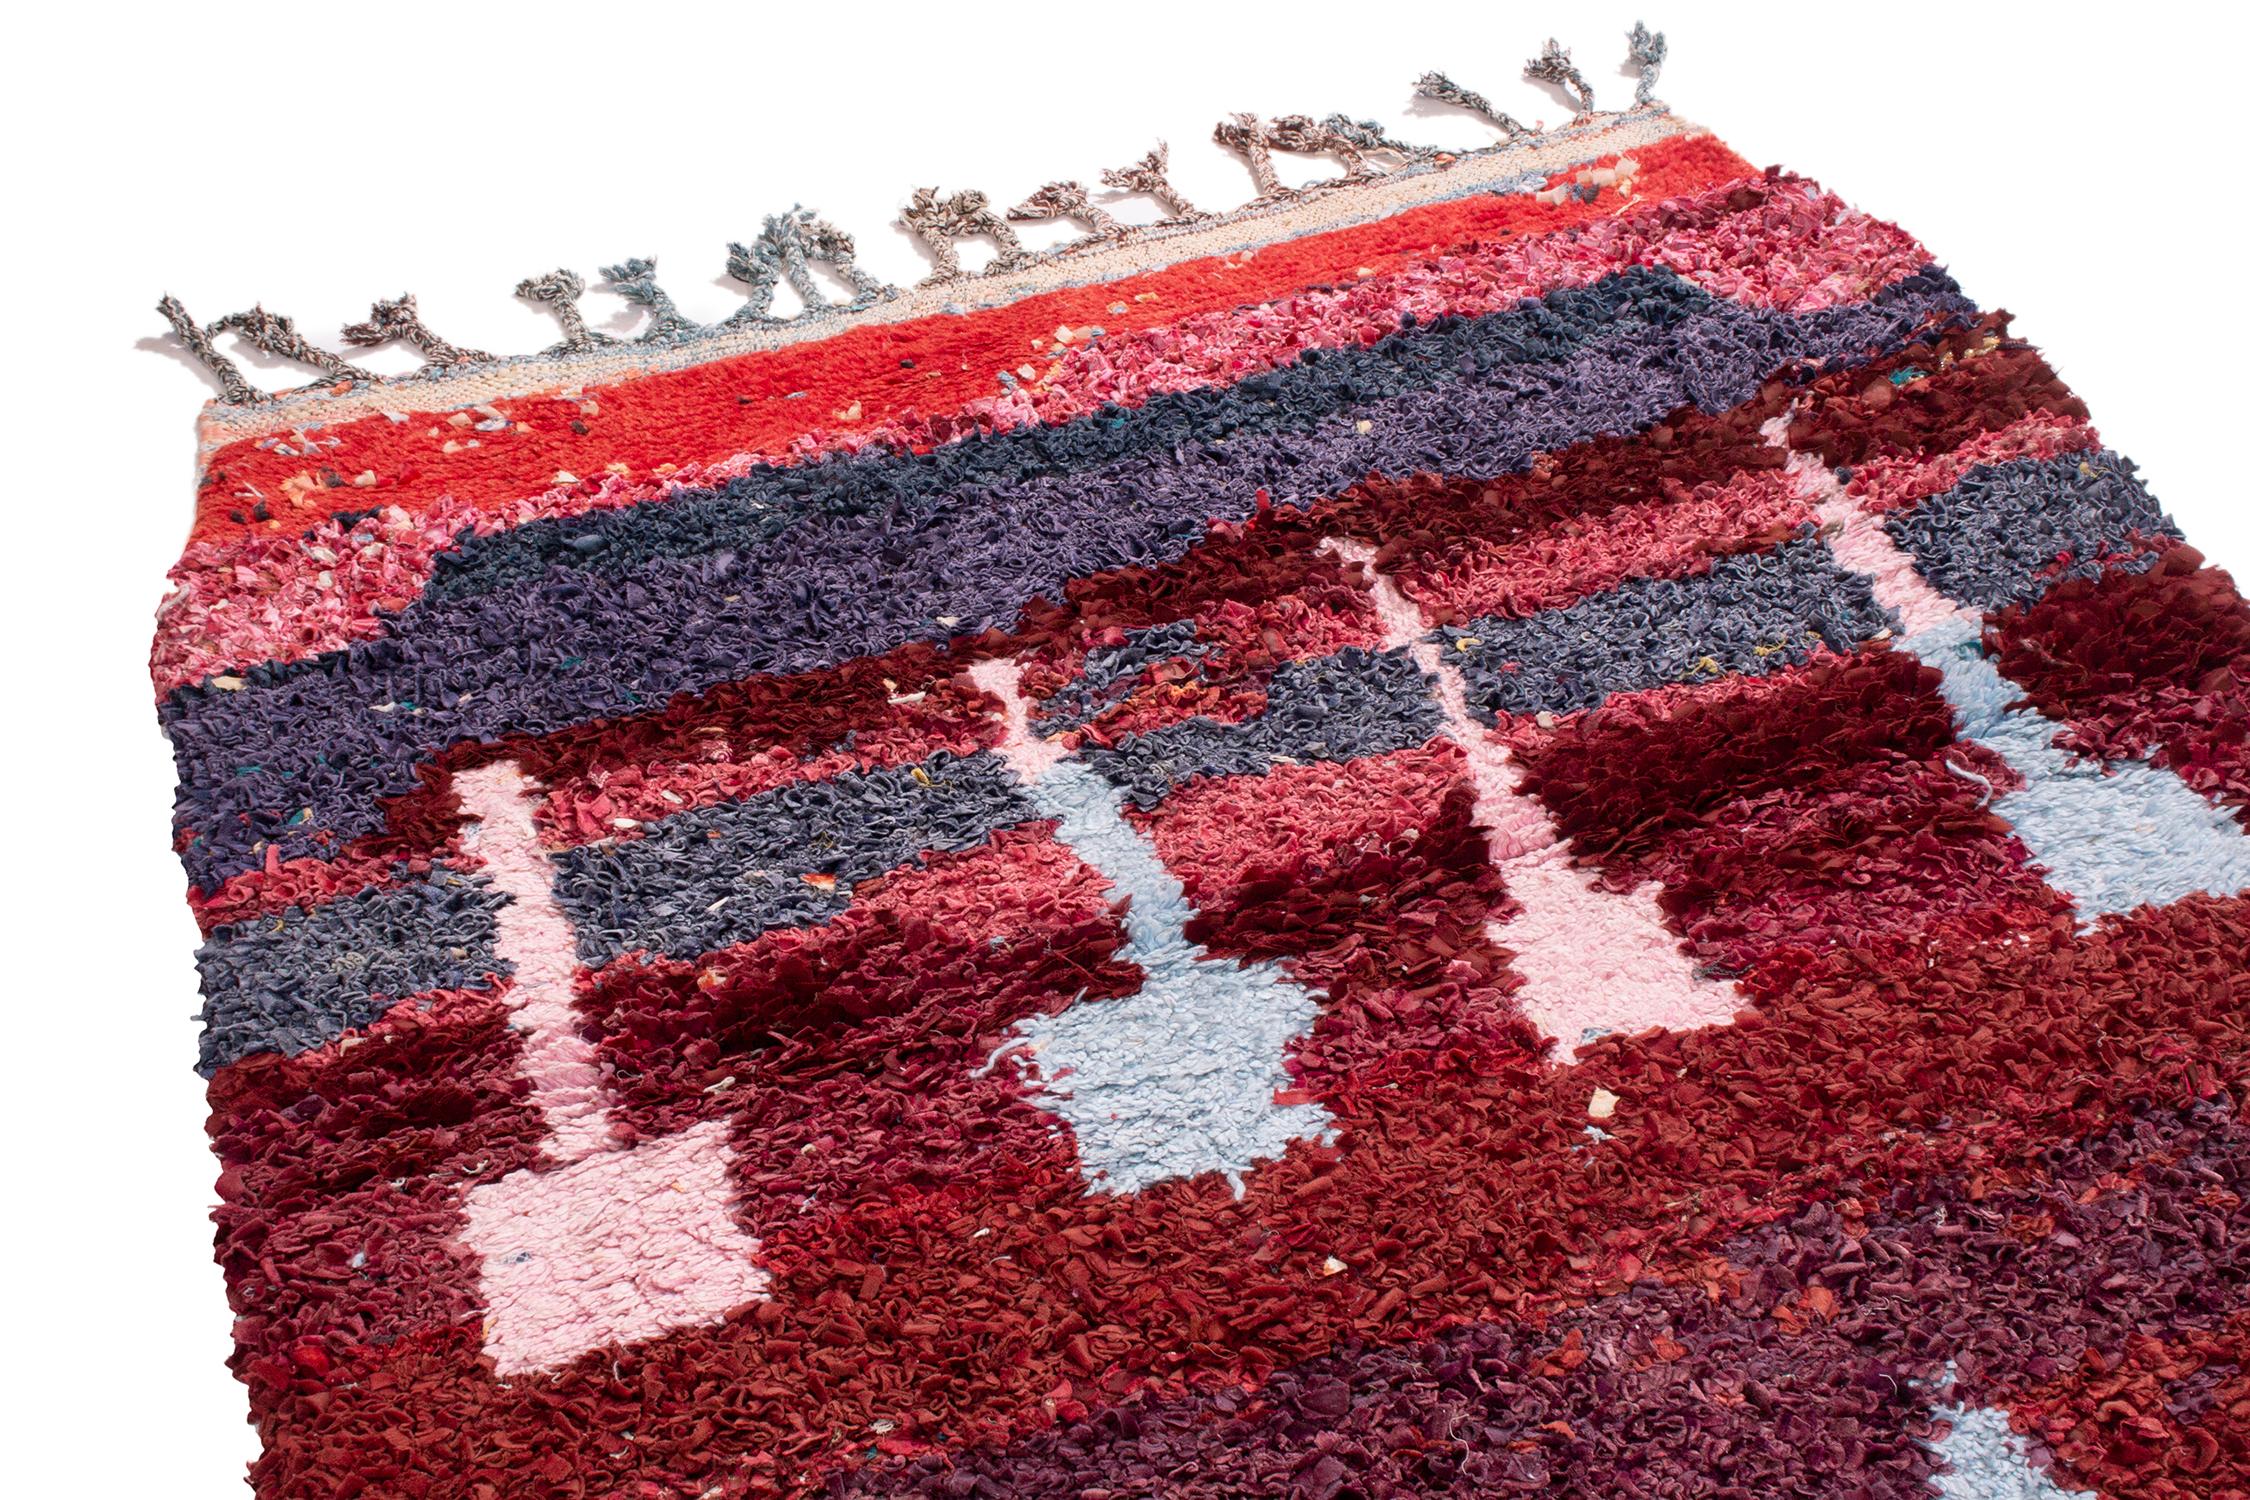 Originating from Morocco in the 1950s, this vintage midcentury Moroccan rug features lesser-known symbols of regional paternity in uniquely bright colorways. Crafted with a distinct background of burgundy red, midnight blue, Abrash pink, purple, and